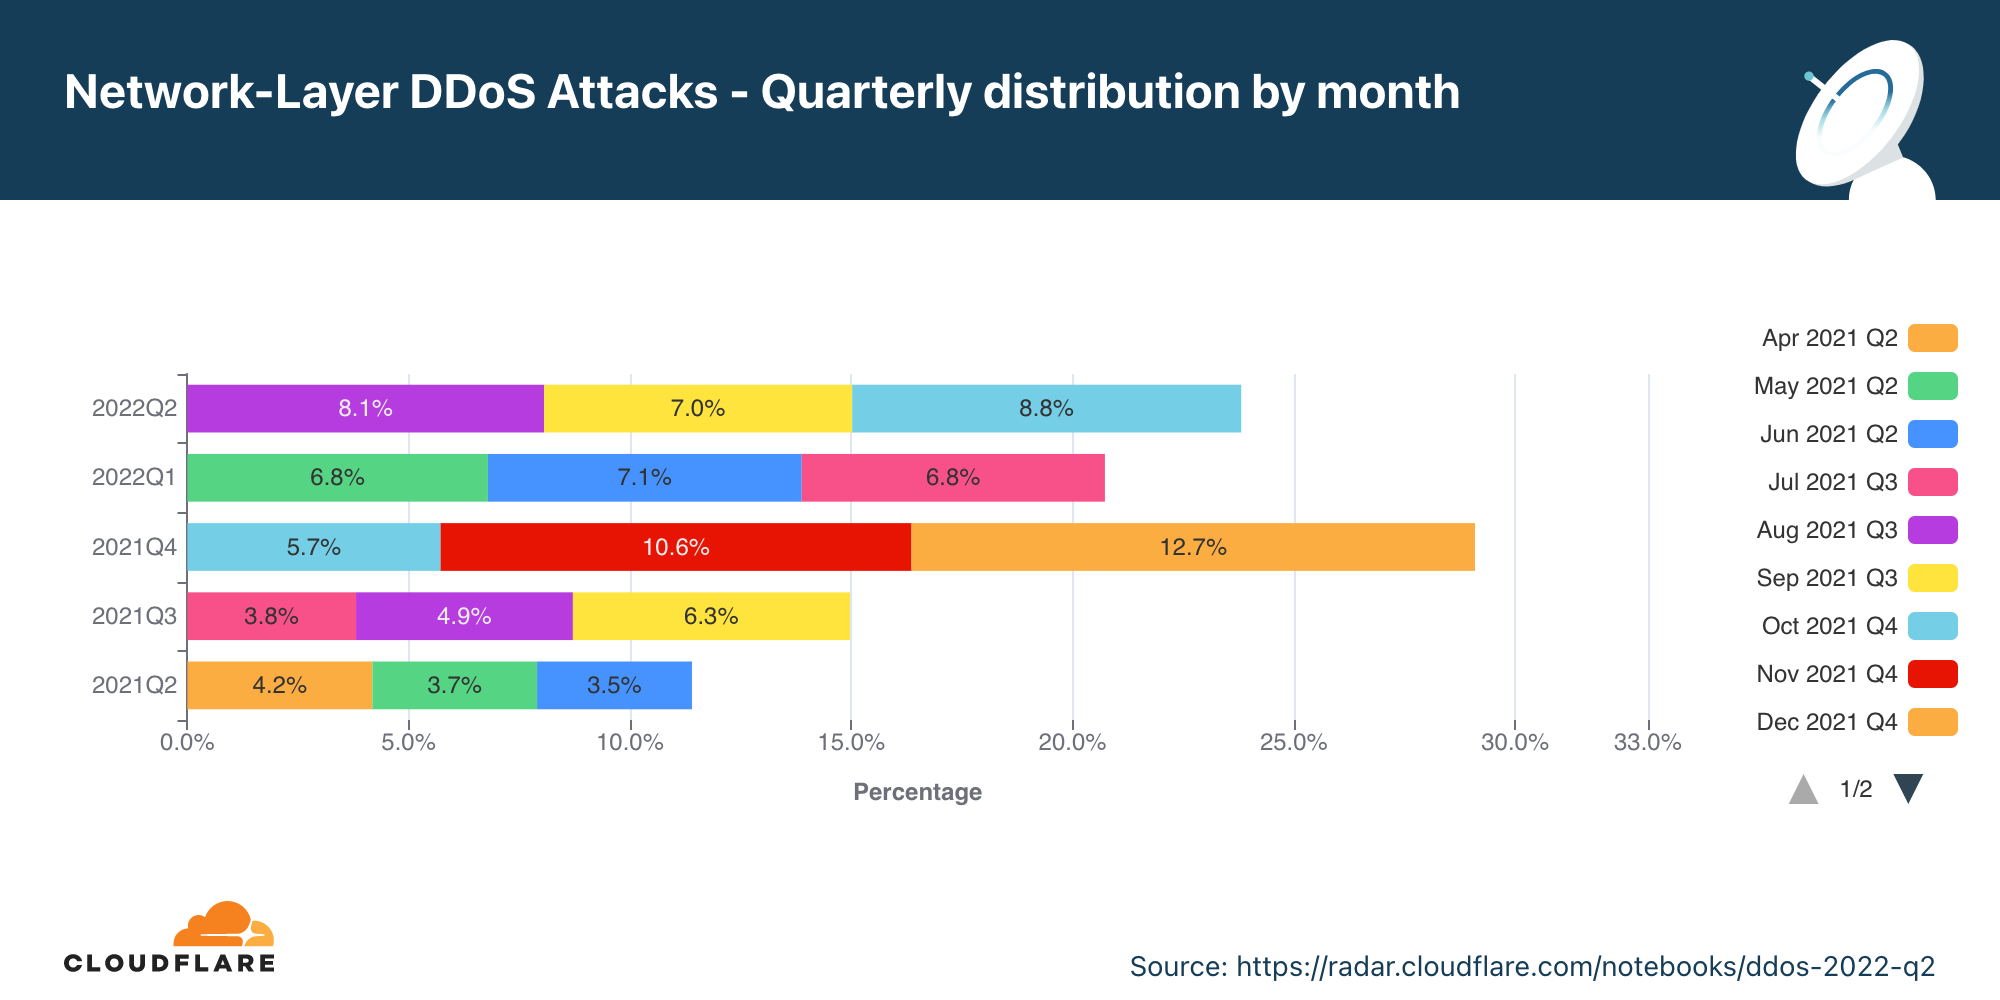 Graph of the yearly distribution of network-layer DDoS attacks by month in the past 12 months